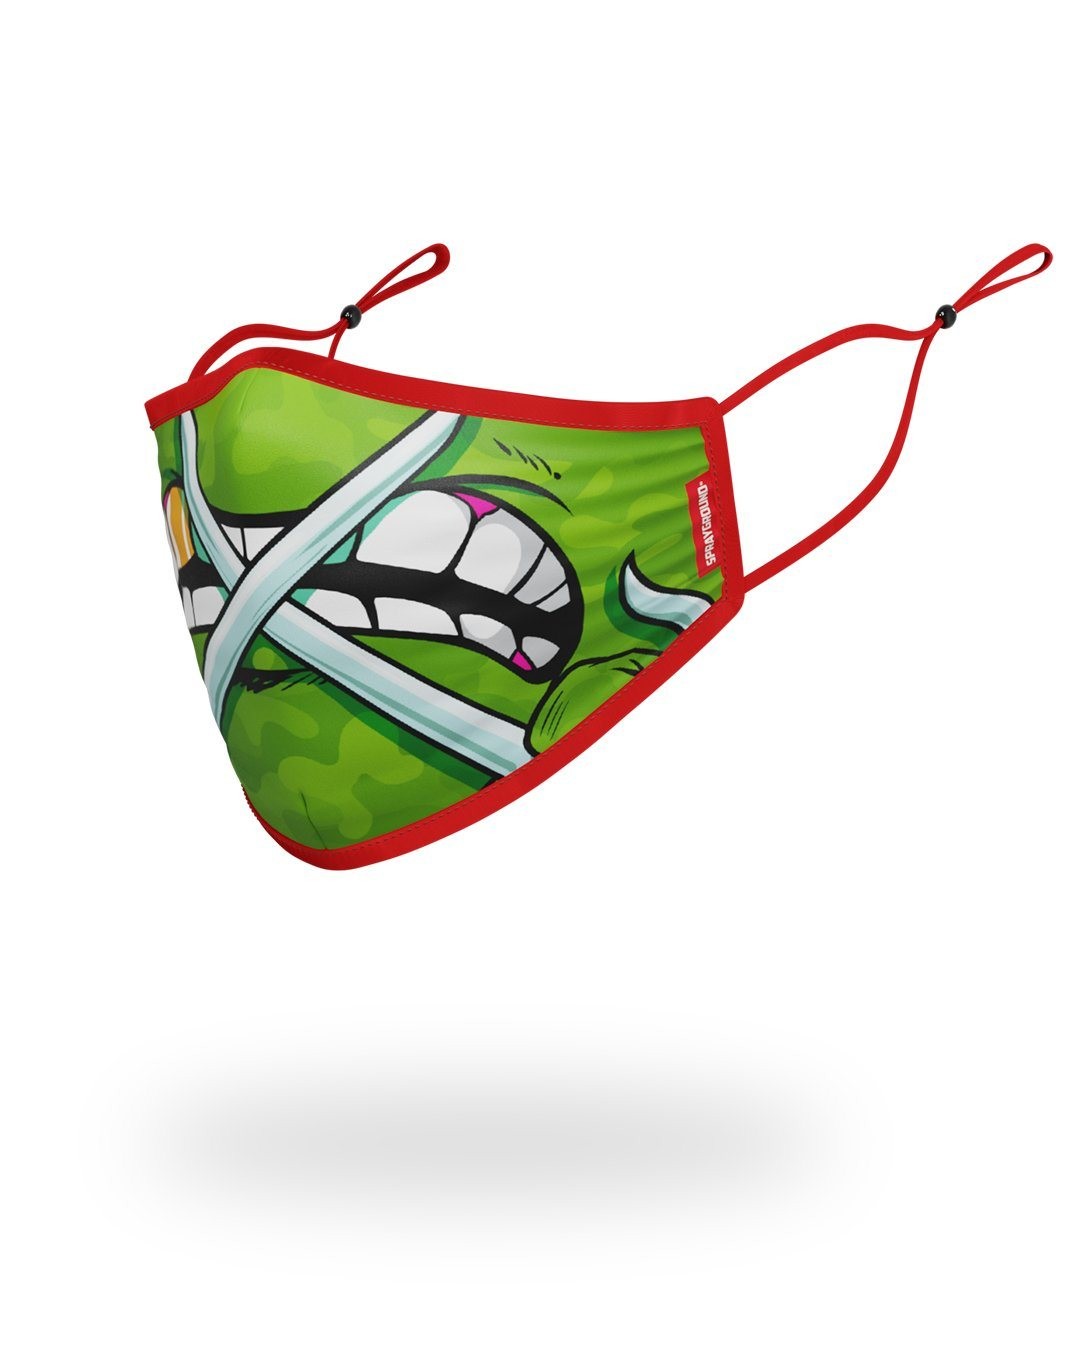 Discount | Adult Tmnt: Raphael Shark Form Fitting Face-Covering Sprayground Sale - Discount | Adult Tmnt: Raphael Shark Form Fitting Face-Covering Sprayground Sale-01-1